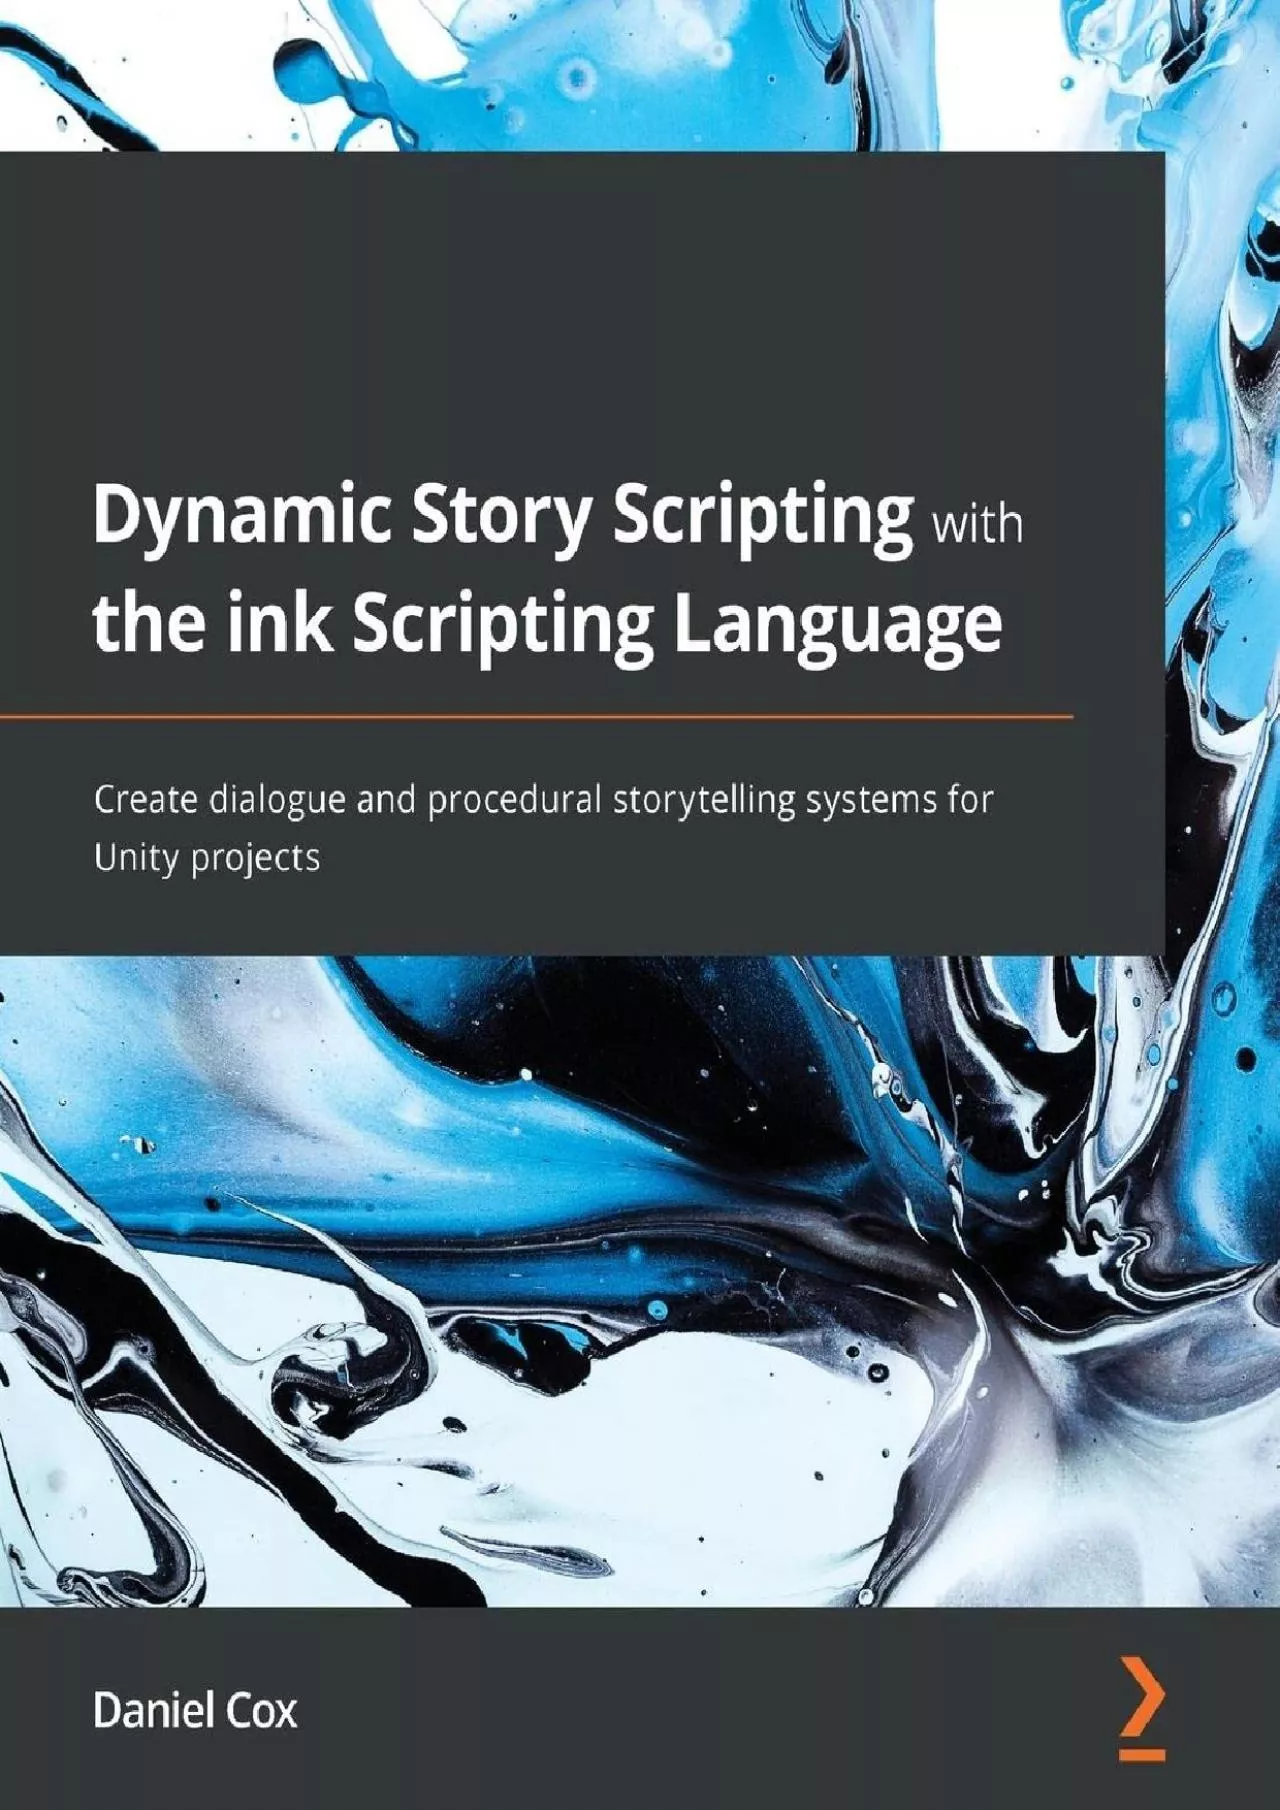 [READ]-Dynamic Story Scripting with the ink Scripting Language: Create dialogue and procedural